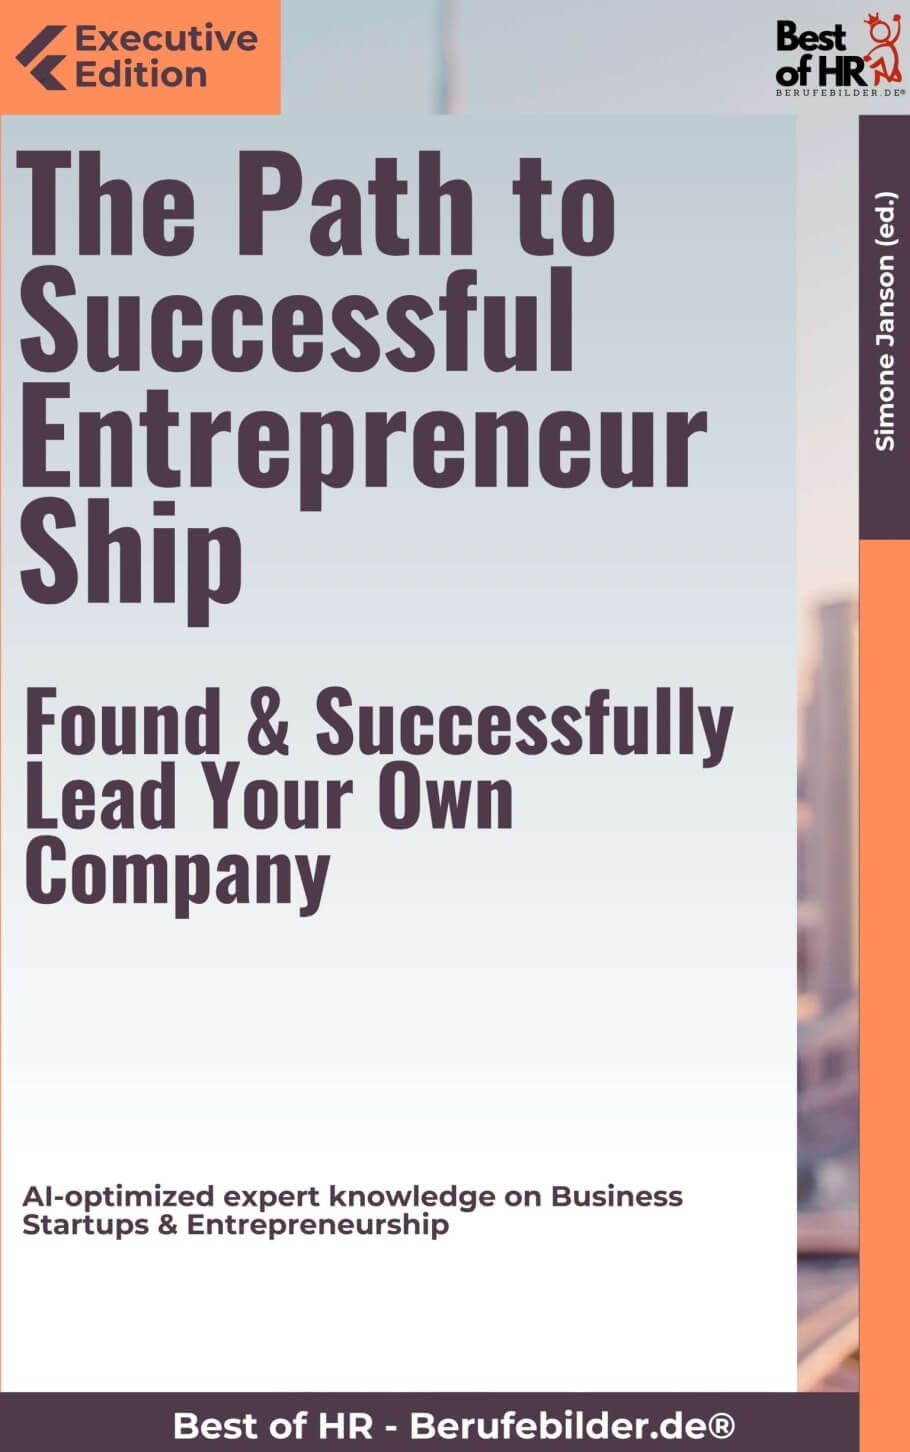 The Path to Successful Entrepreneurship – Found & Successfully Lead Your Own Company (Engl. Version)